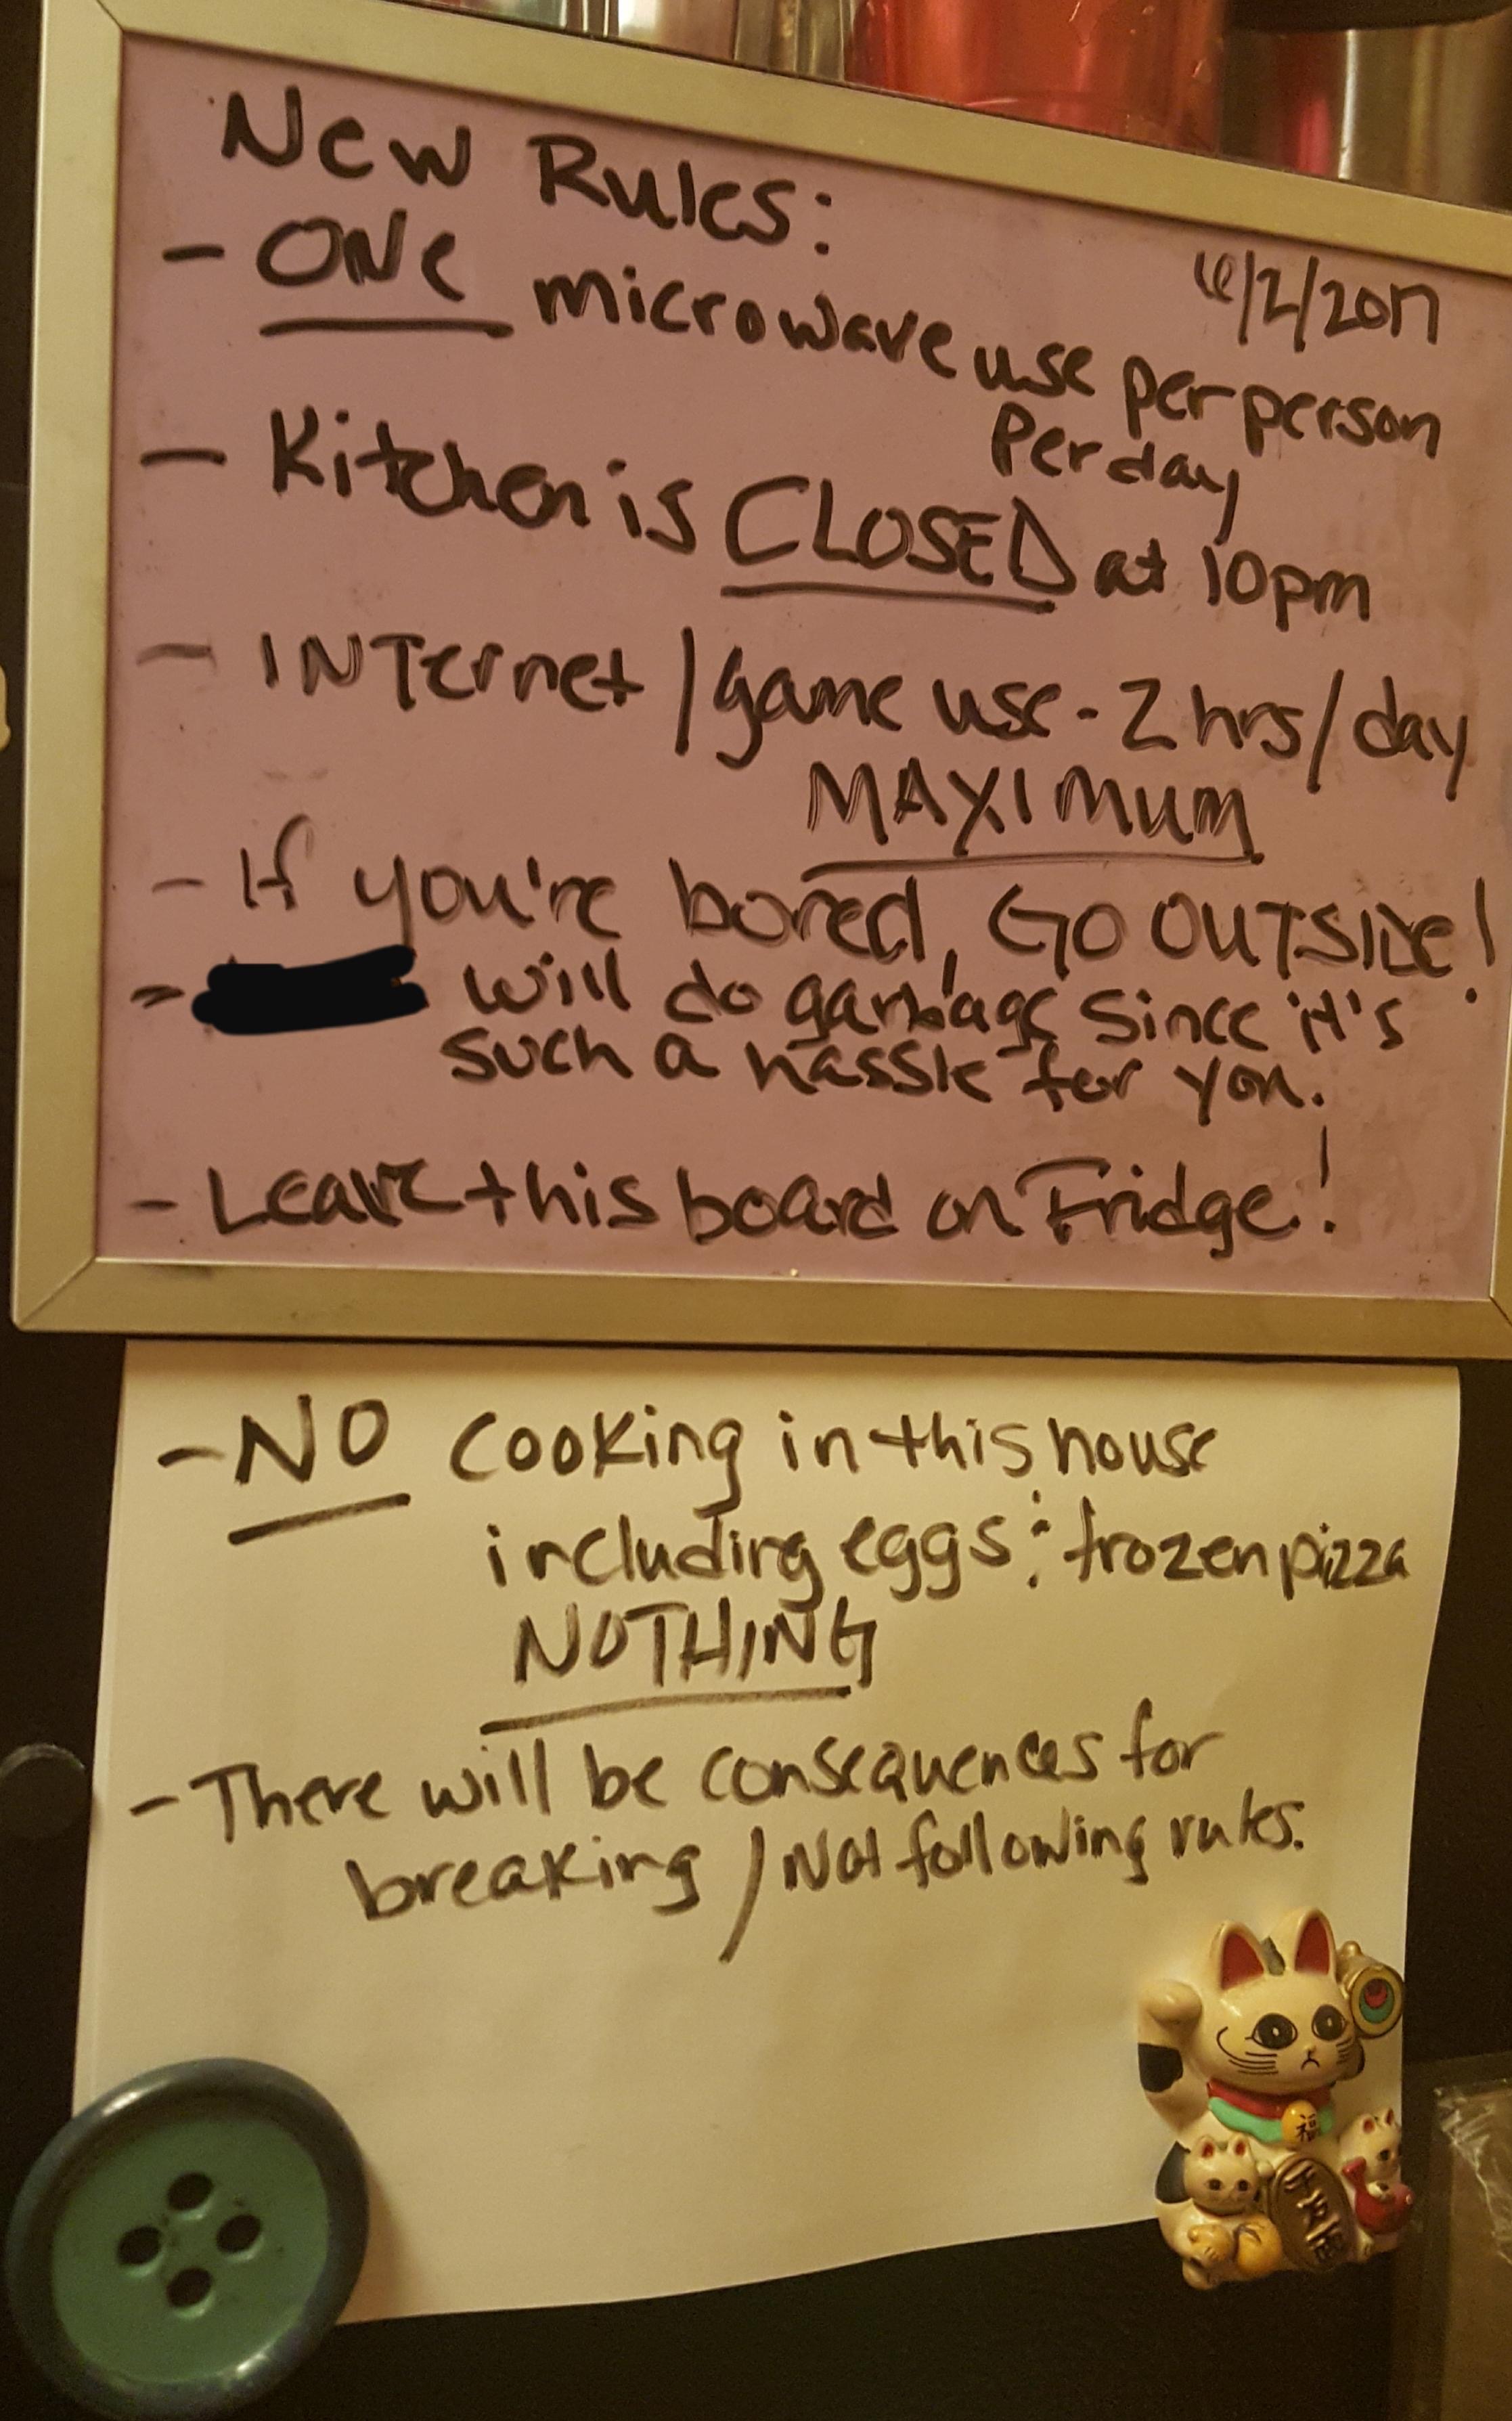 house rules for school days - New Rules 412200 one microwave use per person Kitchen is Closed at 10pm Internet game use. 2 hrsday MAyi Mu If you're bored Go Outside! will do gandag since it's such a hassk for you! Leave this beard on Fridge! No cooking in